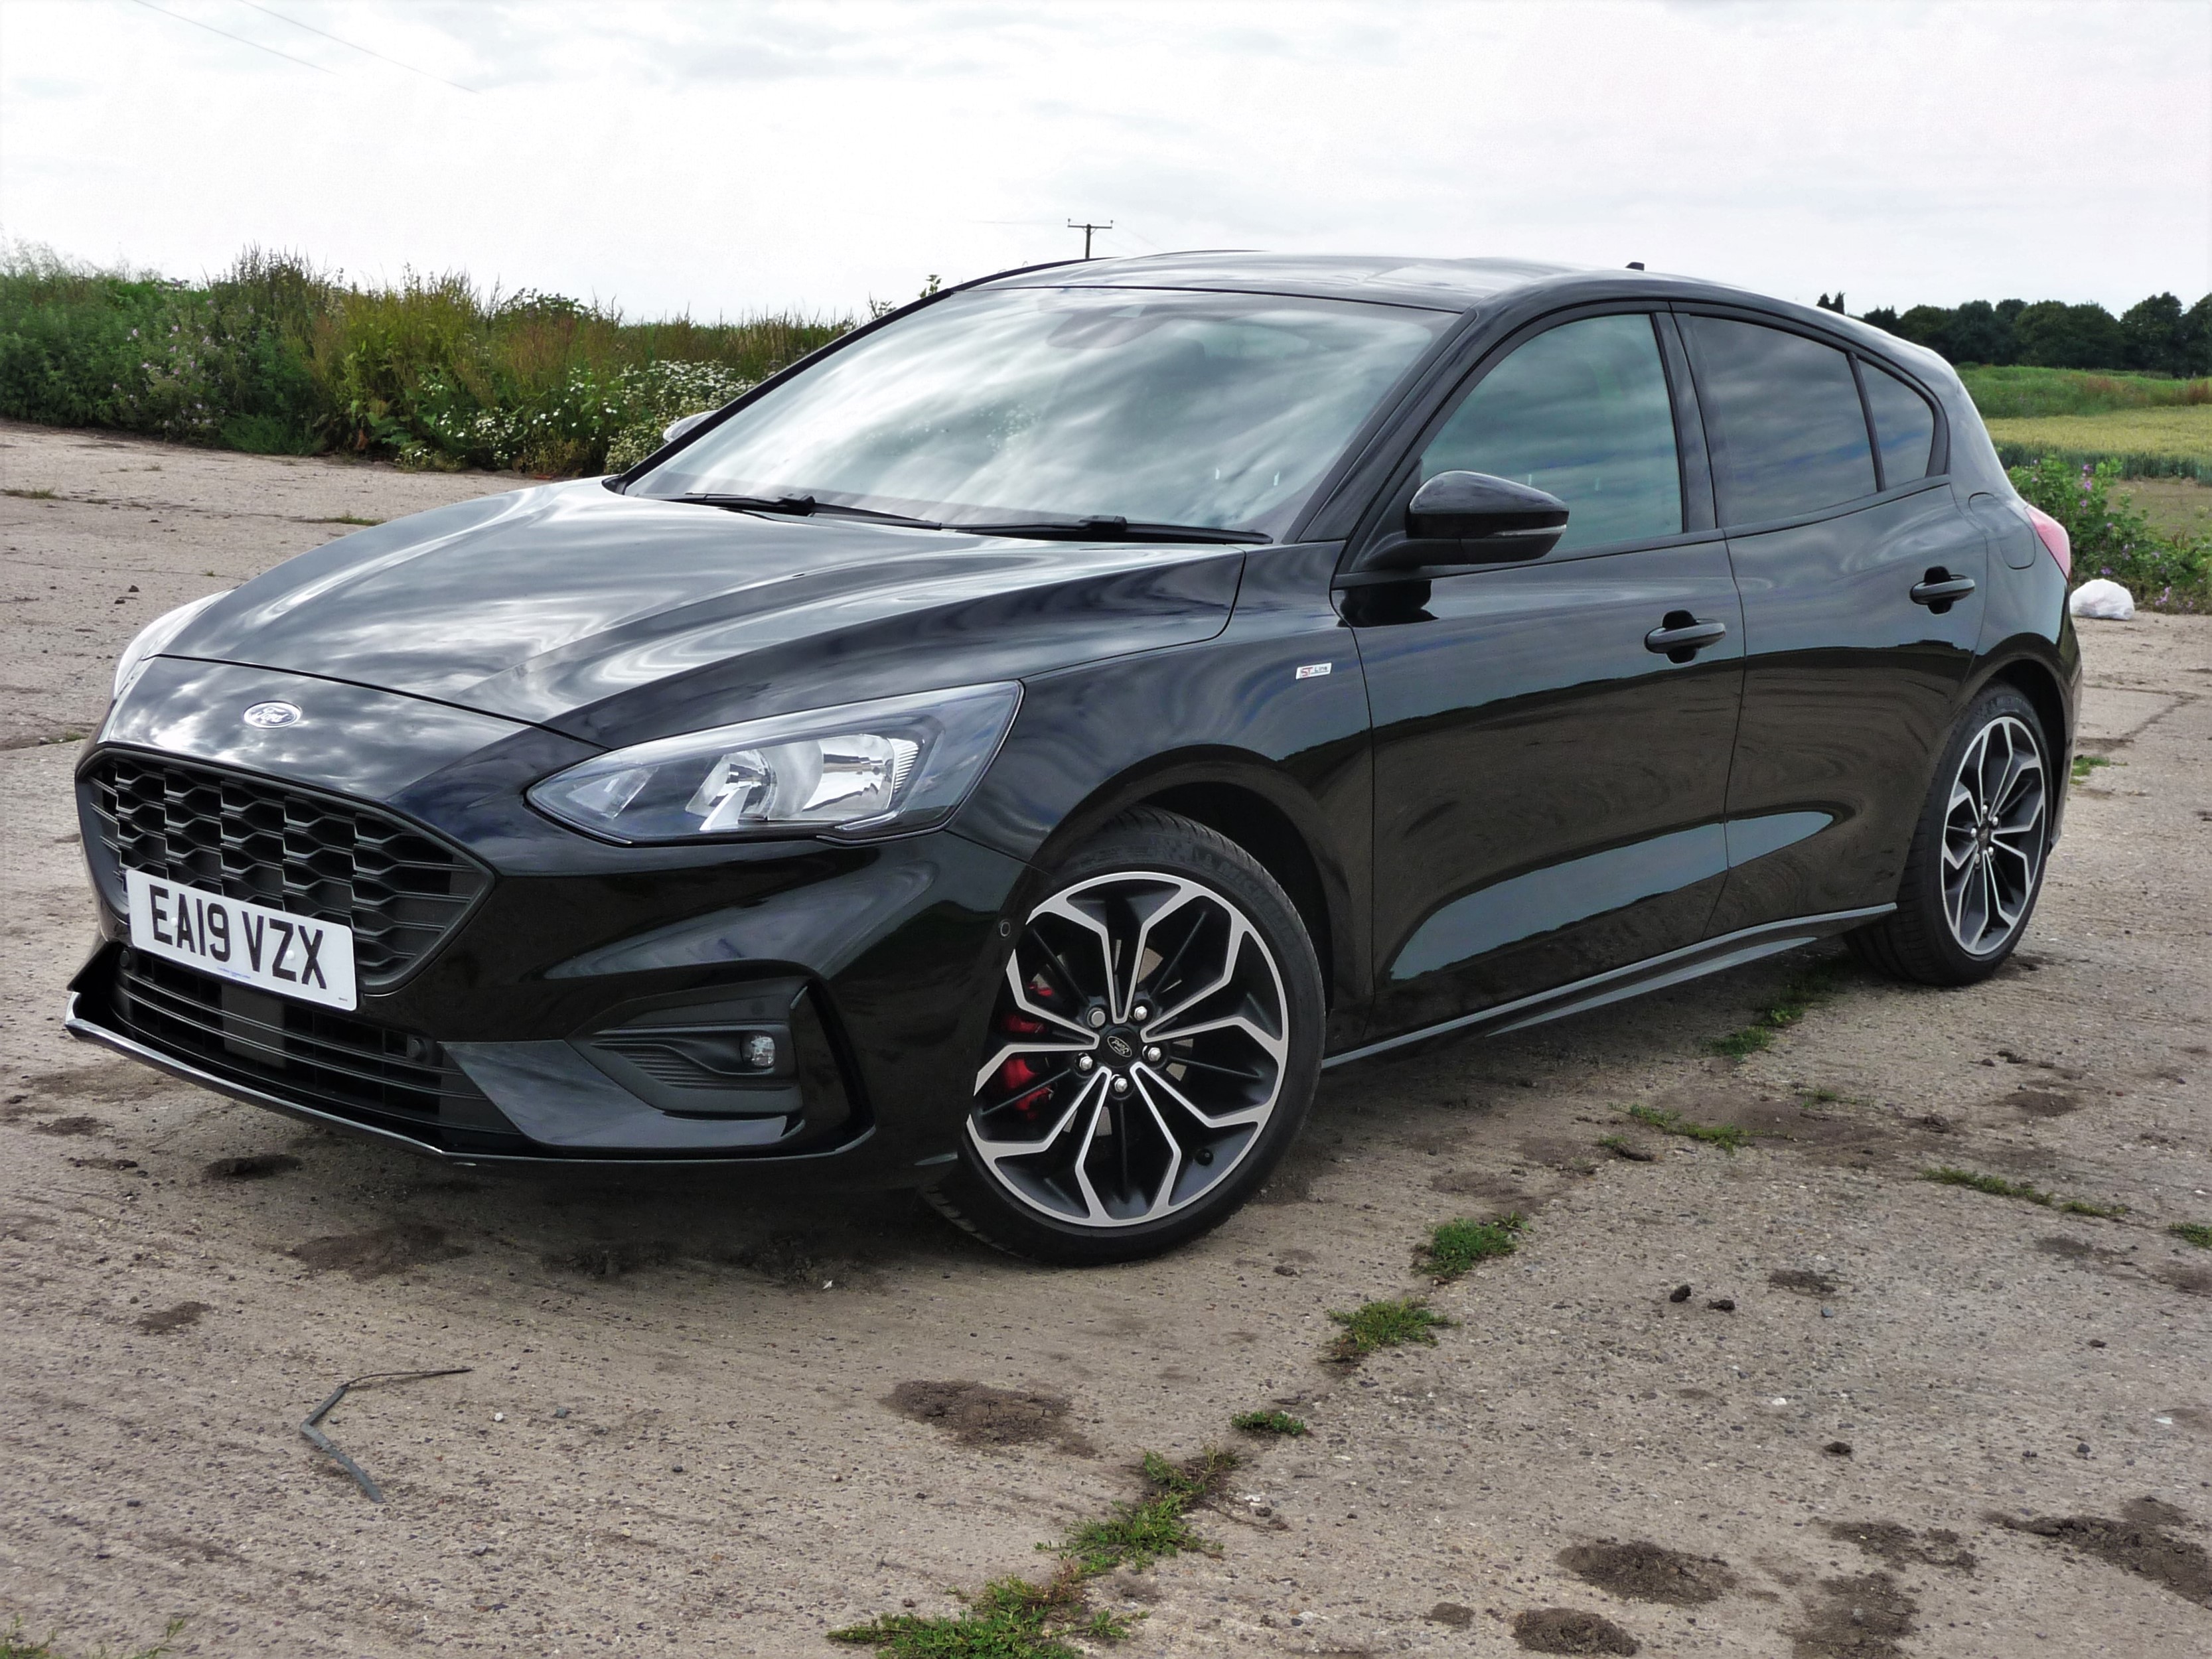 Ford Focus ST exterior restyling